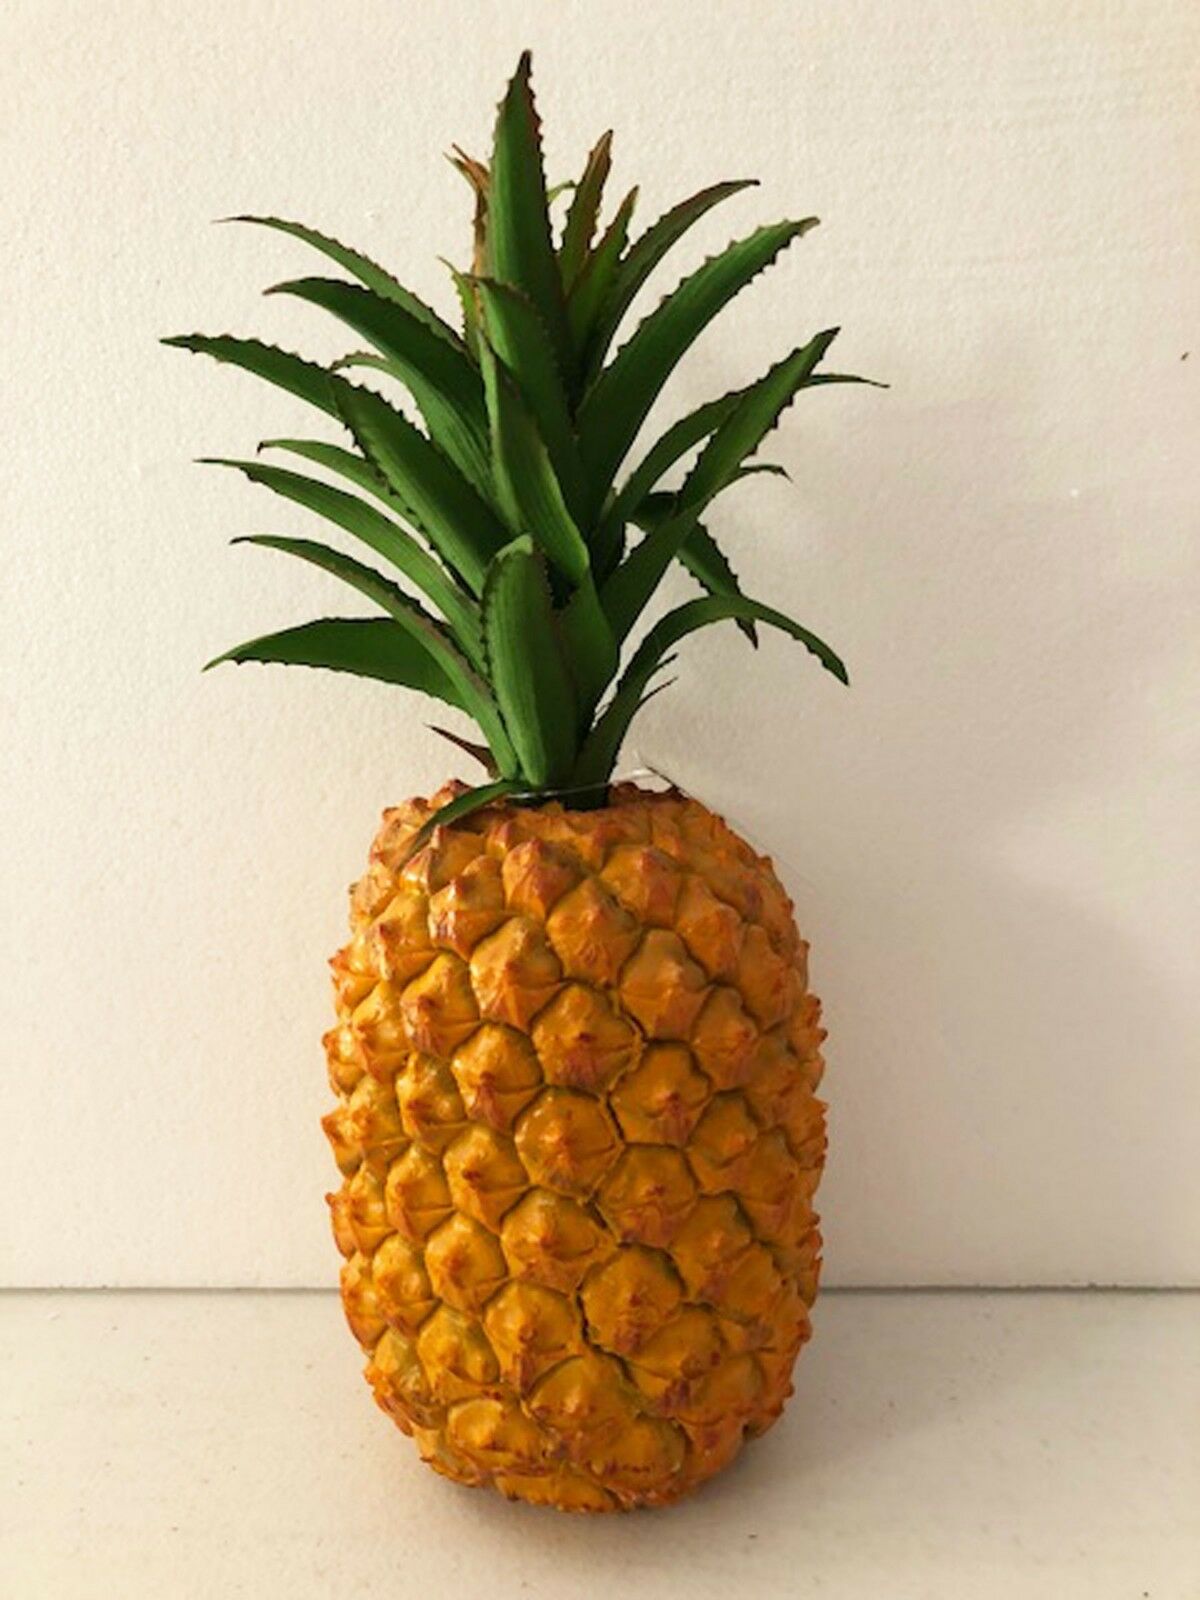 Artificial Large Pineapple Decor Fake Fruit Realistic Life Size Pineapple 11"